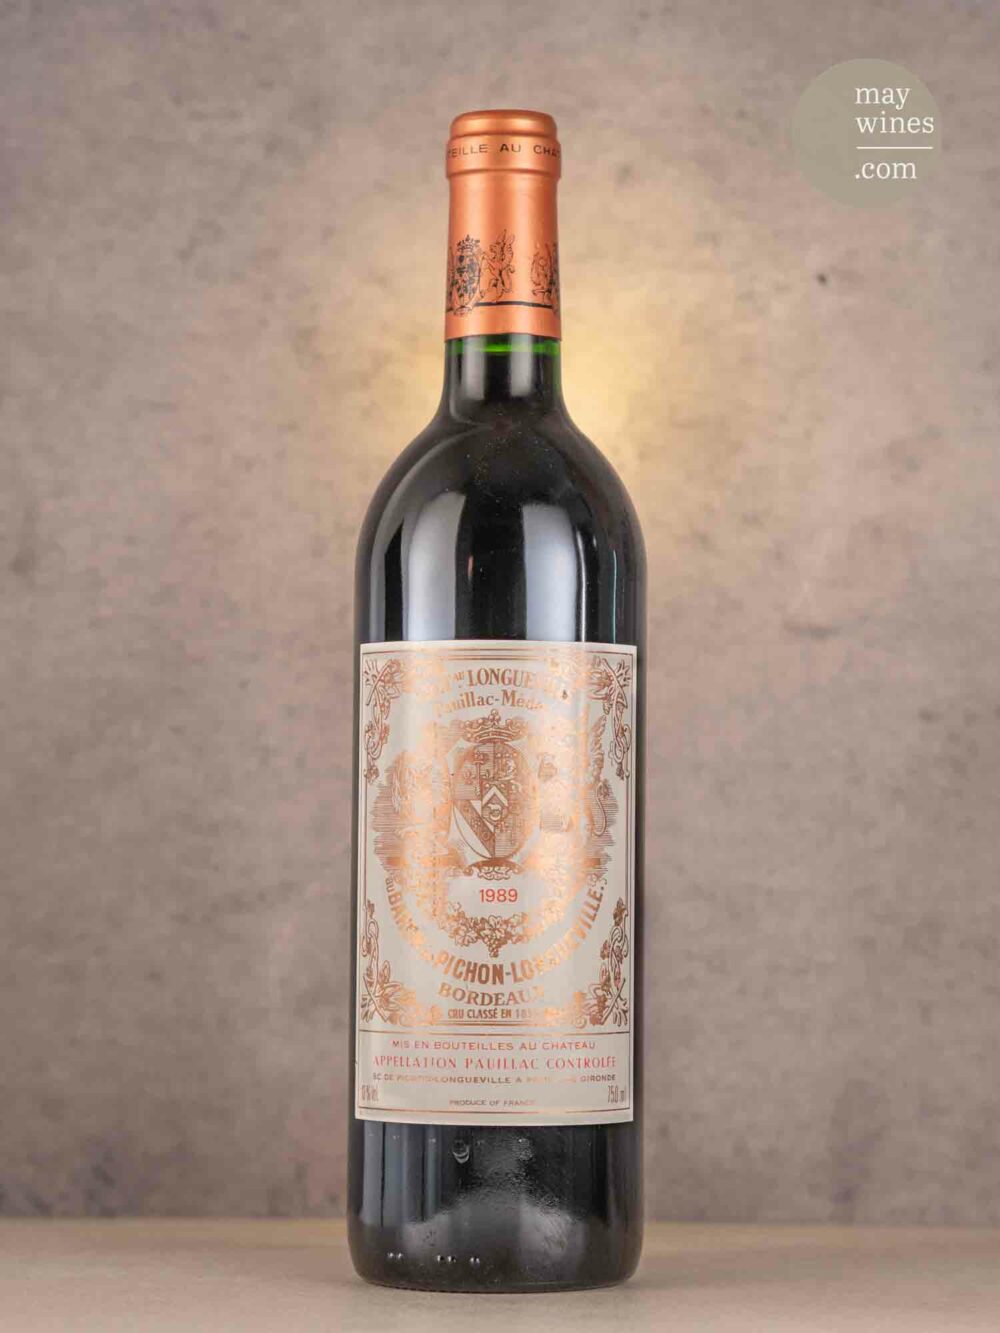 May Wines – Rotwein – 1989 Château Pichon Baron